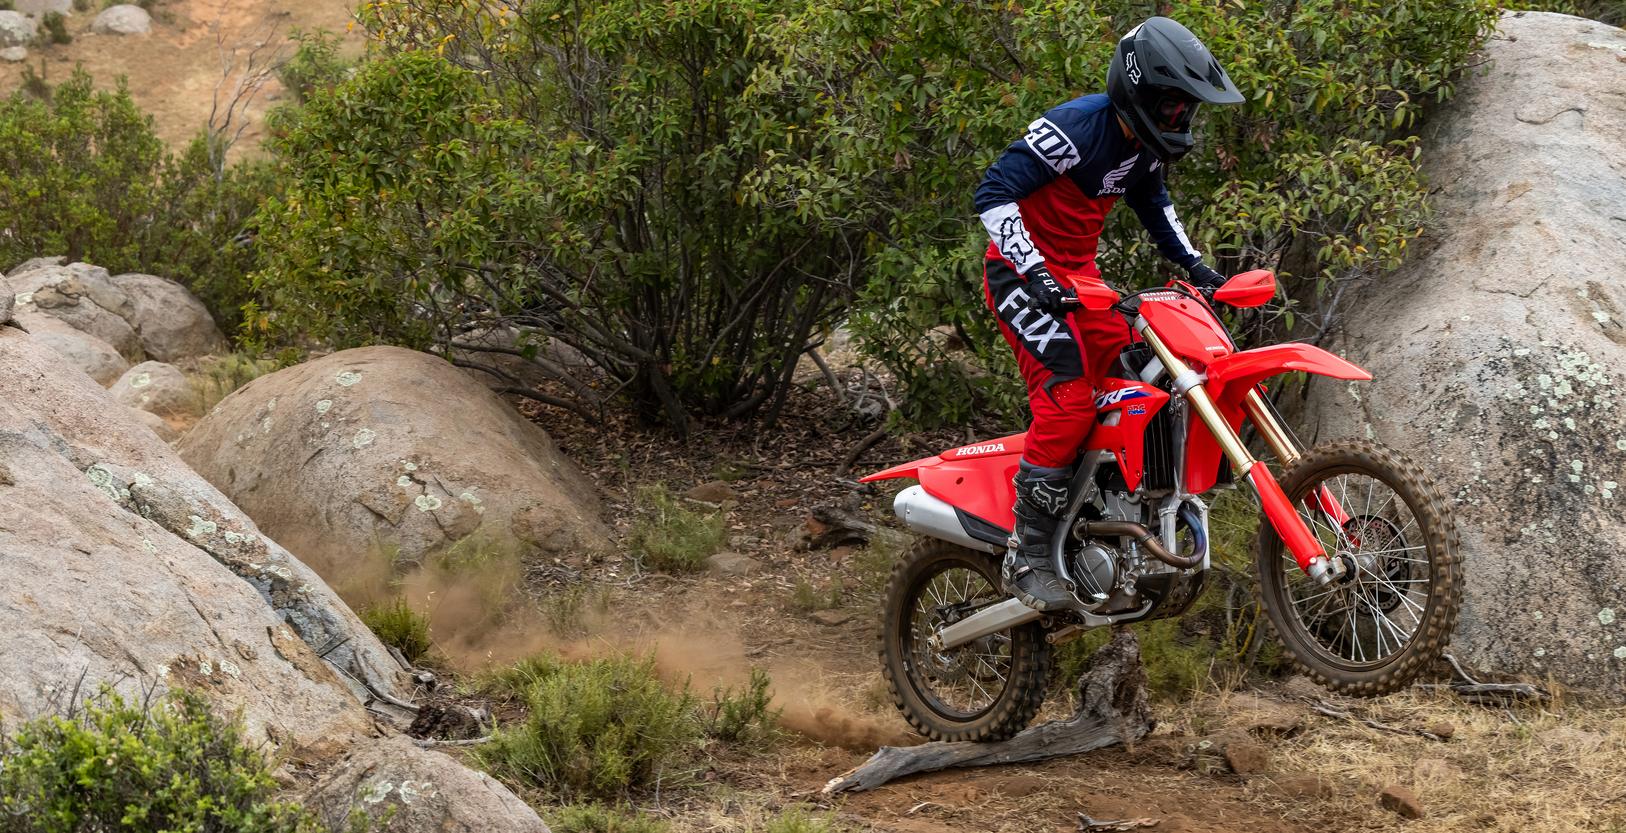 CRF250RX - Ready for any challenge